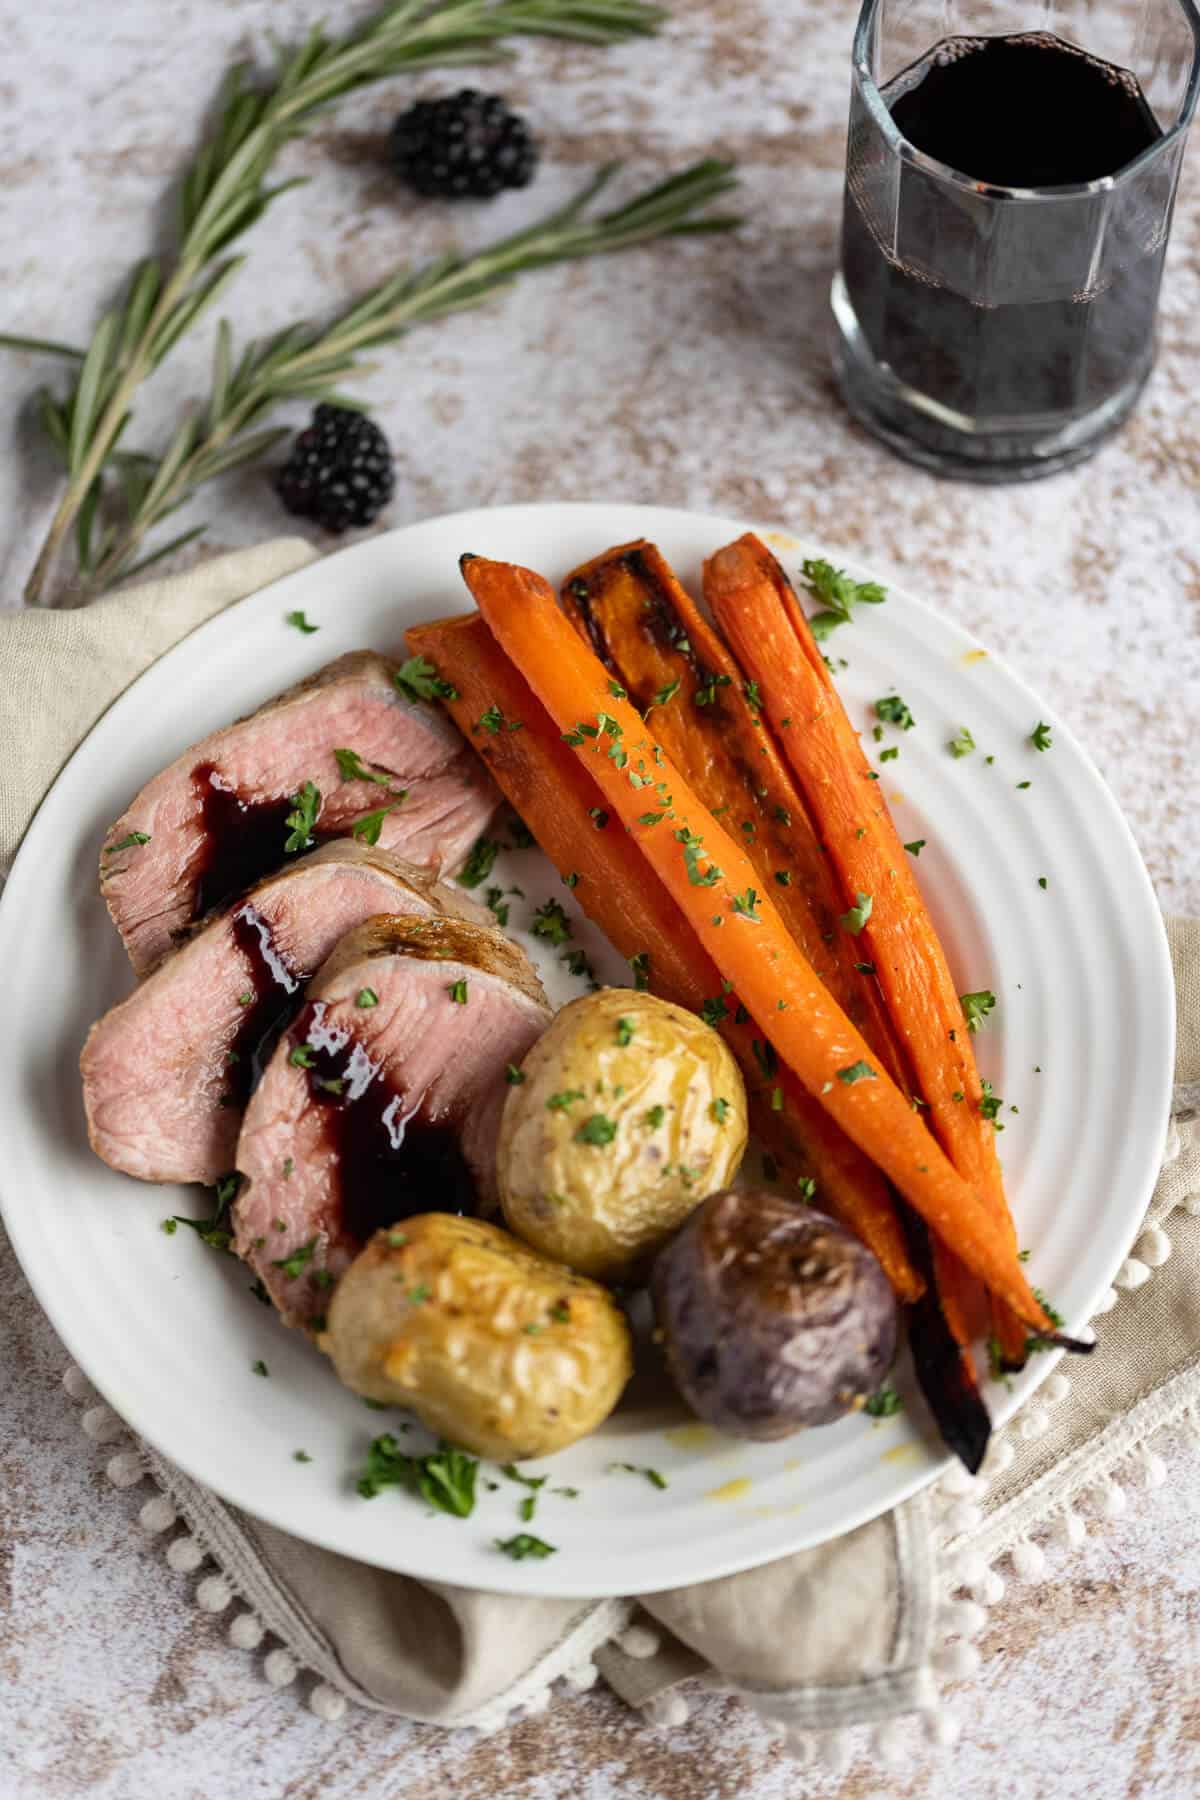 A few slices of pork tenderloin, drizzled with blackberry sauce, on a white plate with roasted carrots and potatoes.